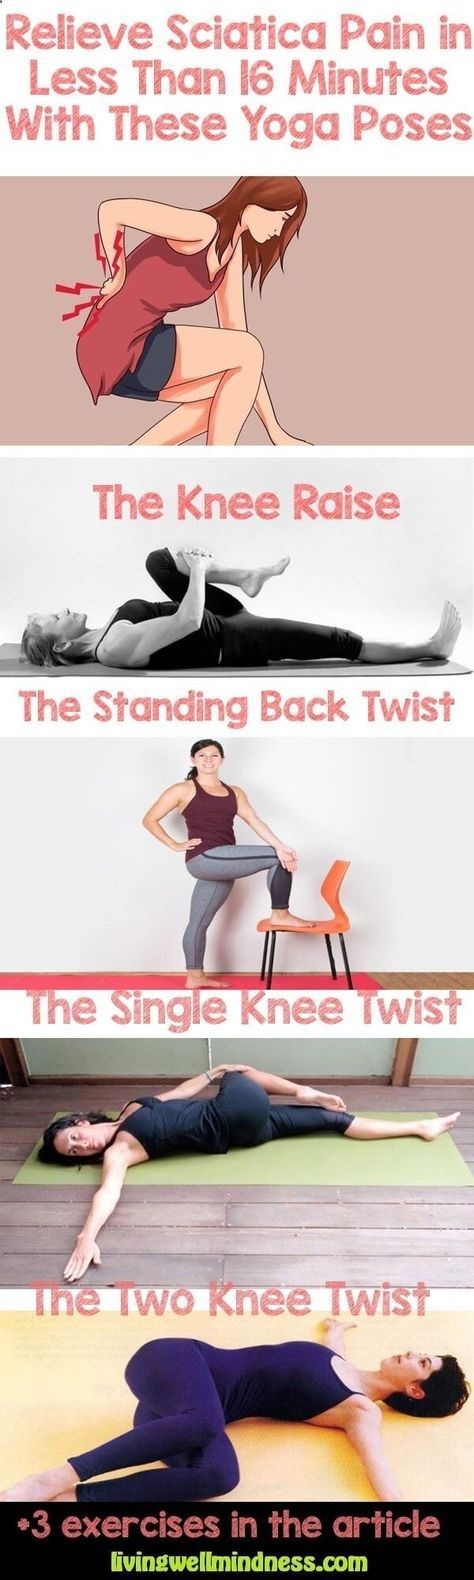 Relieve Sciatica Pain in Less Than 16 Minutes With These Yoga Poses - Living Wel...